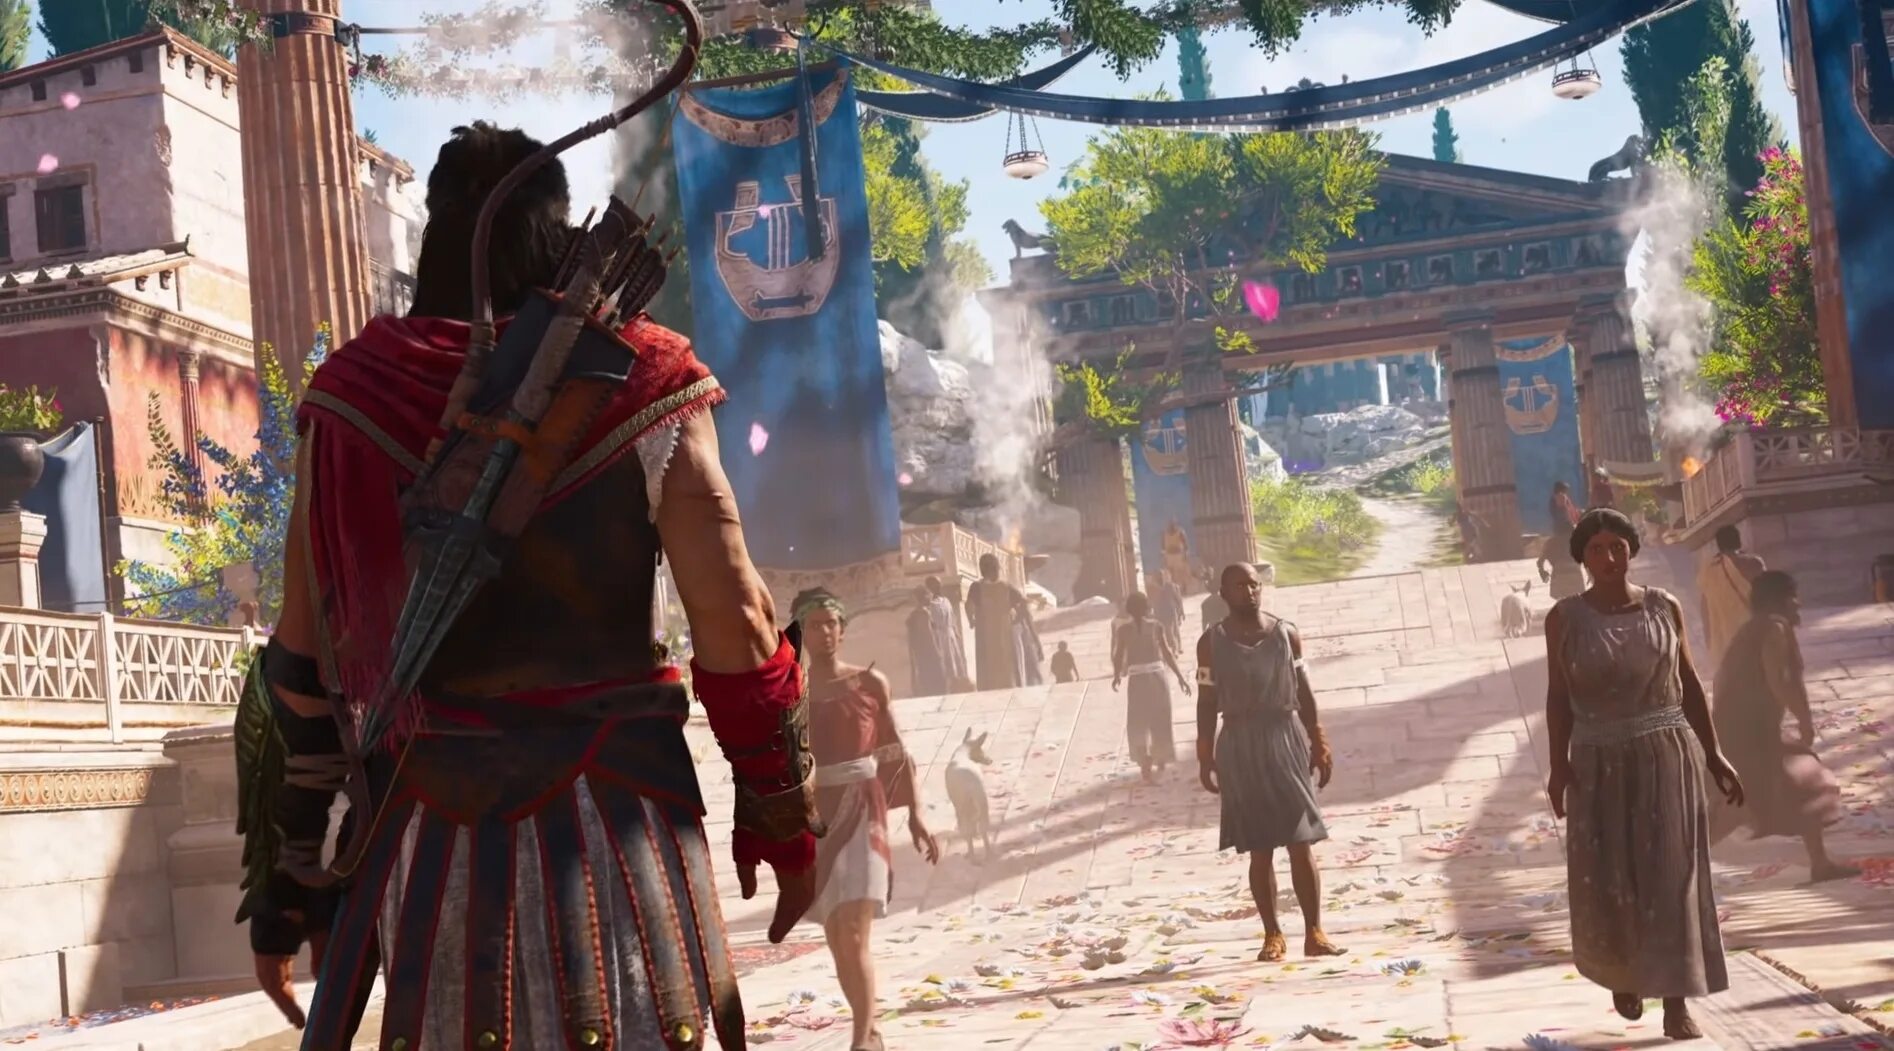 Игру assassin s creed odyssey. Assassin"s Creed Odyssey. Ассасин Крид Одиссей. Assassin's Creed Odyssey геймплей. Ассасин Крид Одиссея геймплей.